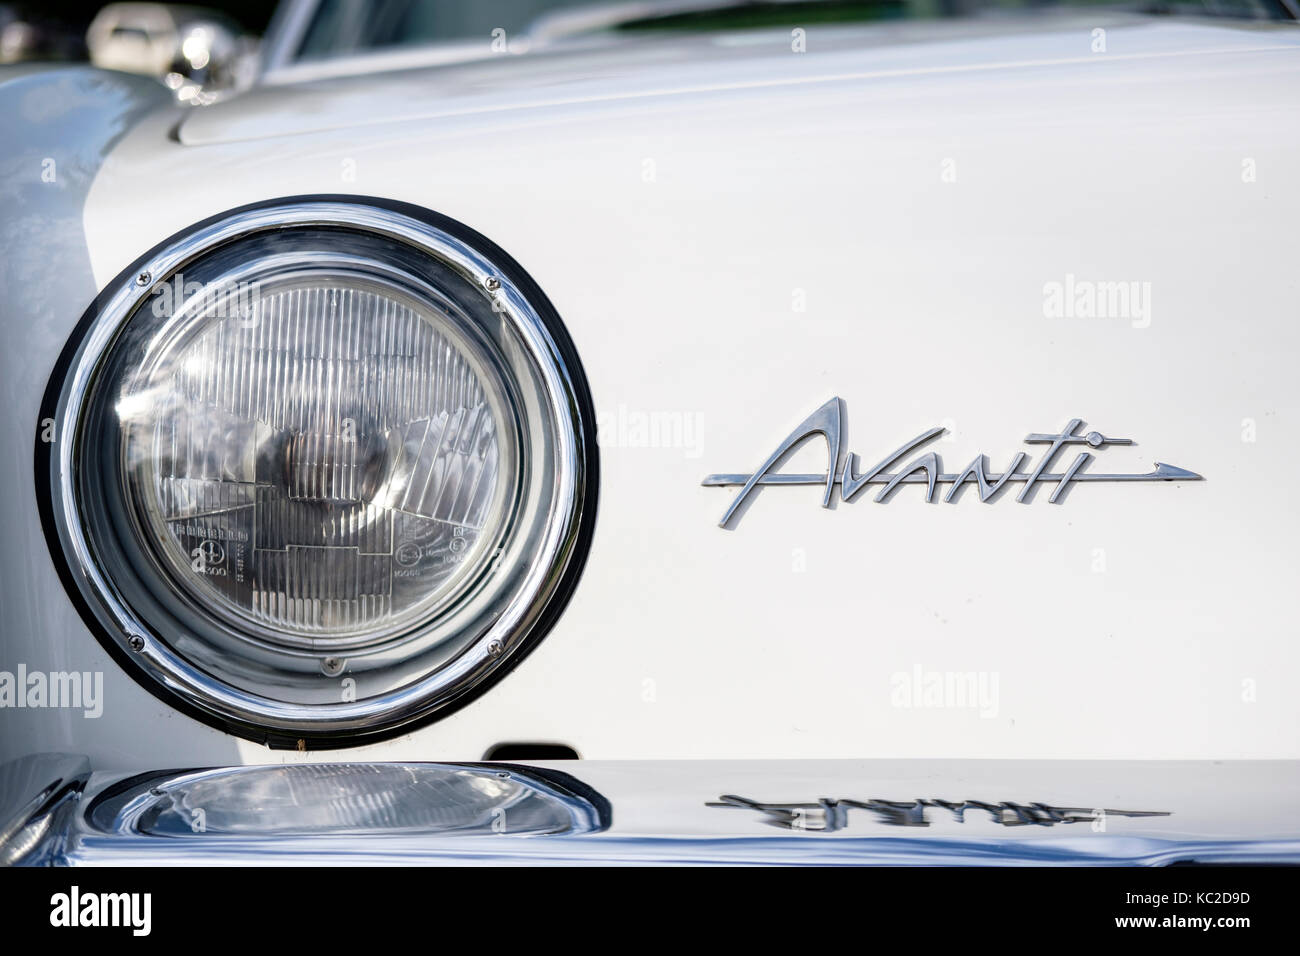 Front view of white 1963 Studebaker Avanti S, close-up of headlight and logo. Stock Photo